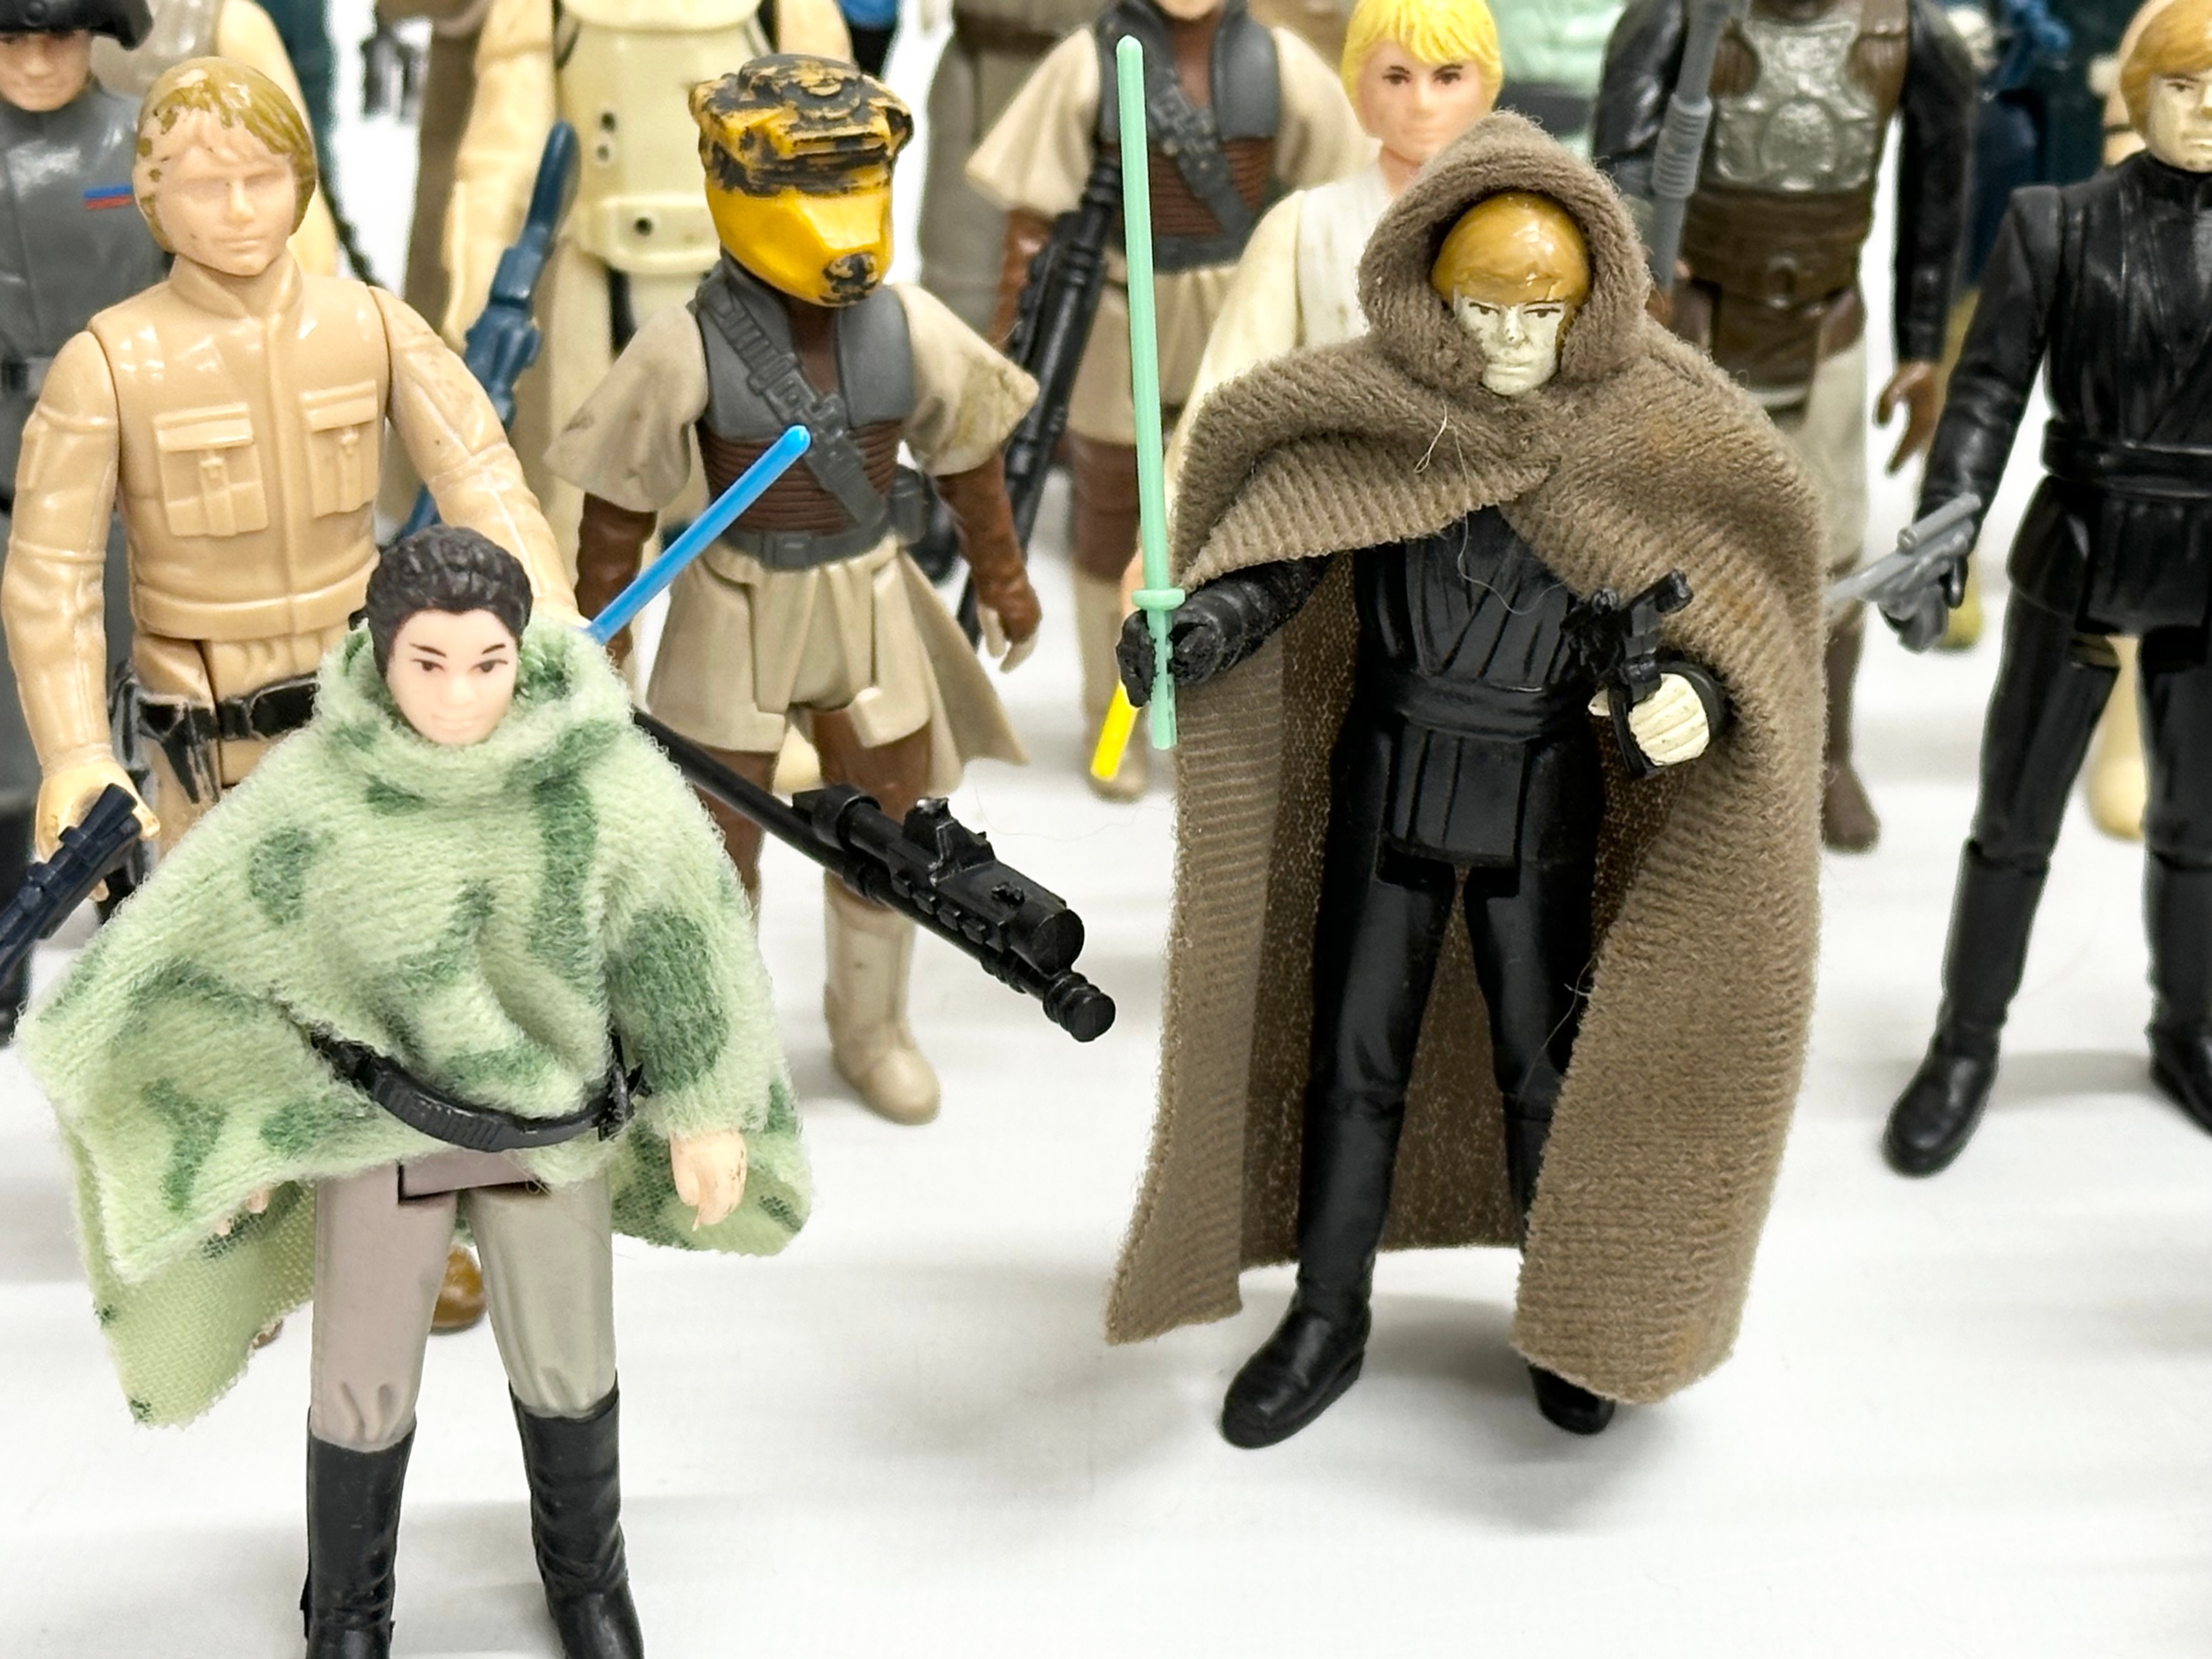 A collection of 1970’s/80’s Star Wars action figures and weapons. - Image 5 of 24